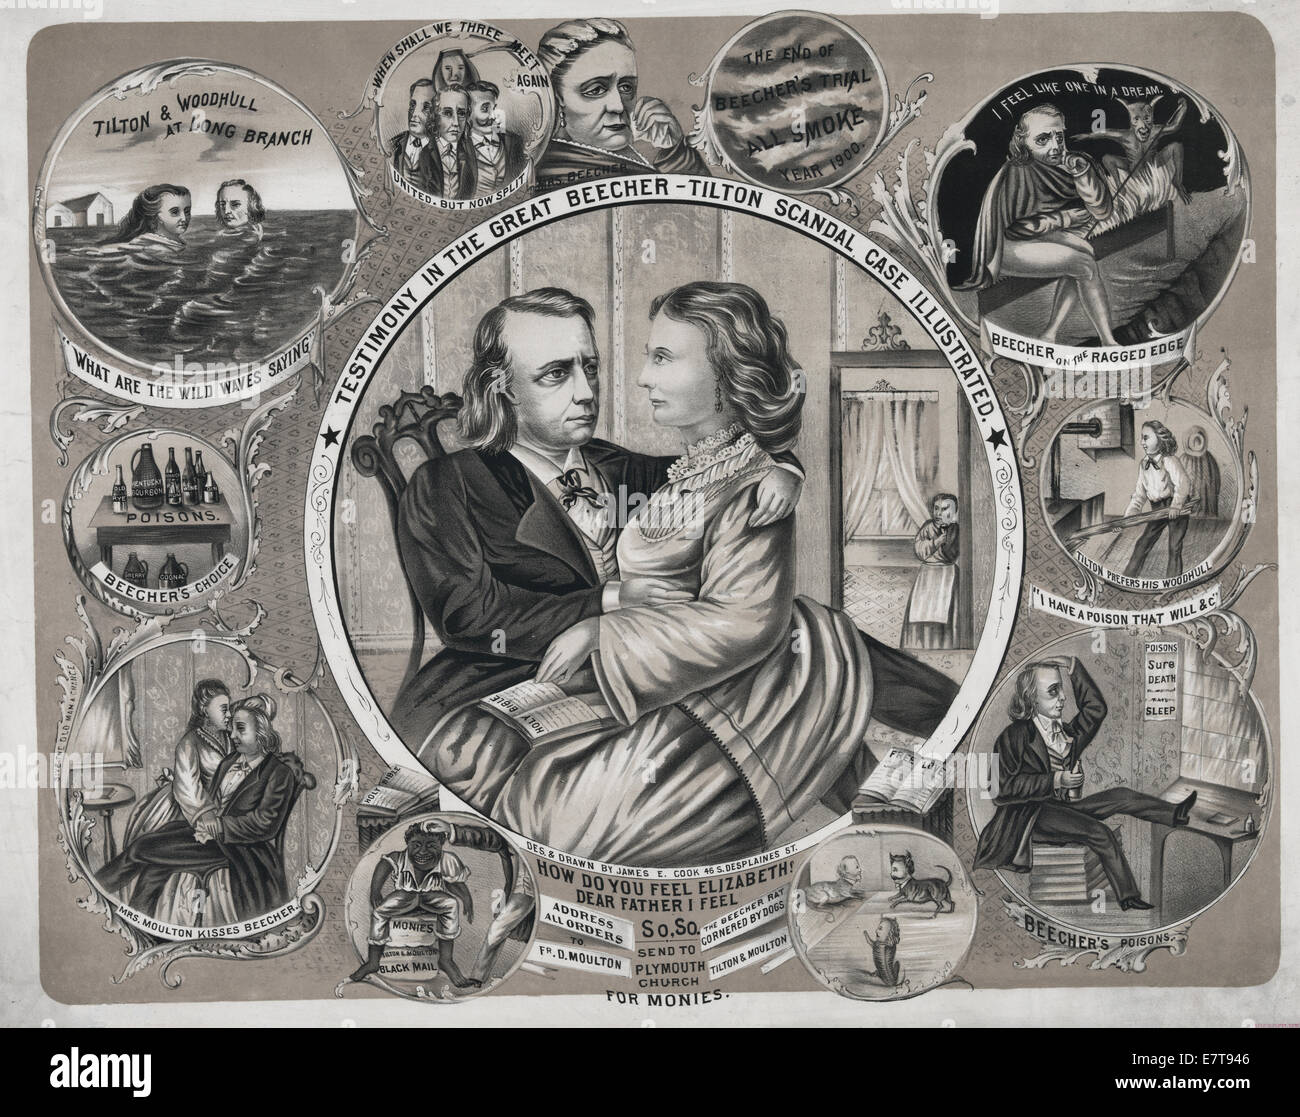 Testimony in the great Beecher-Tilton scandal case illustrated - Henry Ward Beecher with Elizabeth Tilton sitting on his lap as he embraces her, the 'Holy Bible' open on her lap. Includes vignettes of the Henry Ward Beecher-Theodore Tilton scandal, including 'Tilton & Woodhull swimming at Long Branch'; Mrs. Frank Moulton kisses Beecher'; Beecher drinking one of his alcoholic 'Poisons'; 'Beecher on the Ragged Edge' of a saw blade, with caption 'I feel like one in a dream' and a devil; 'Mrs. Beecher' crying; and a prediction 'The end of Beecher's trail all smoke, 1900 Stock Photo